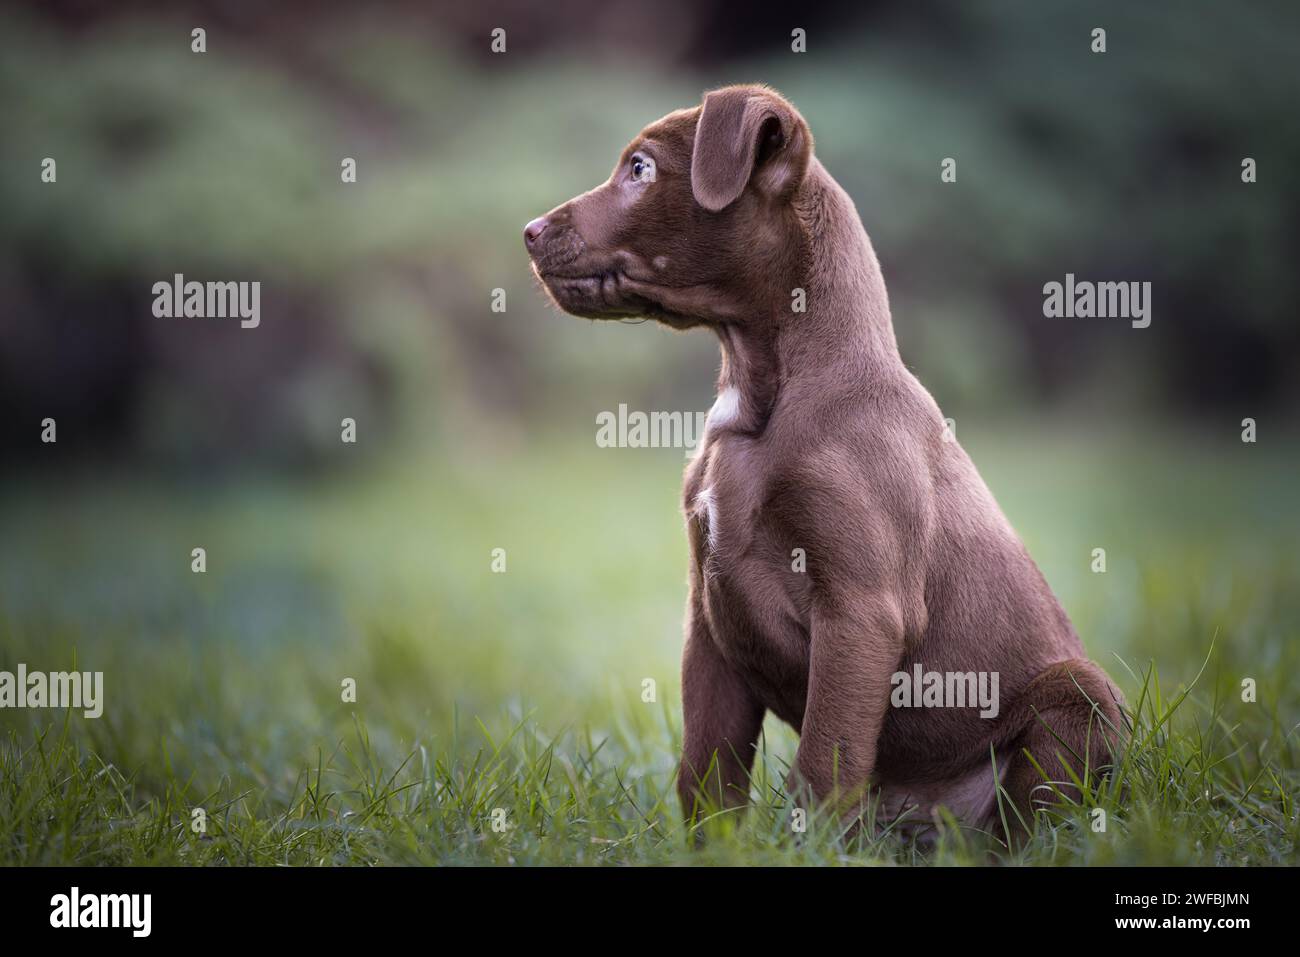 Cute brown Patterdale terrier puppy sitting on grass and looking sideways to the left with copy space Stock Photo